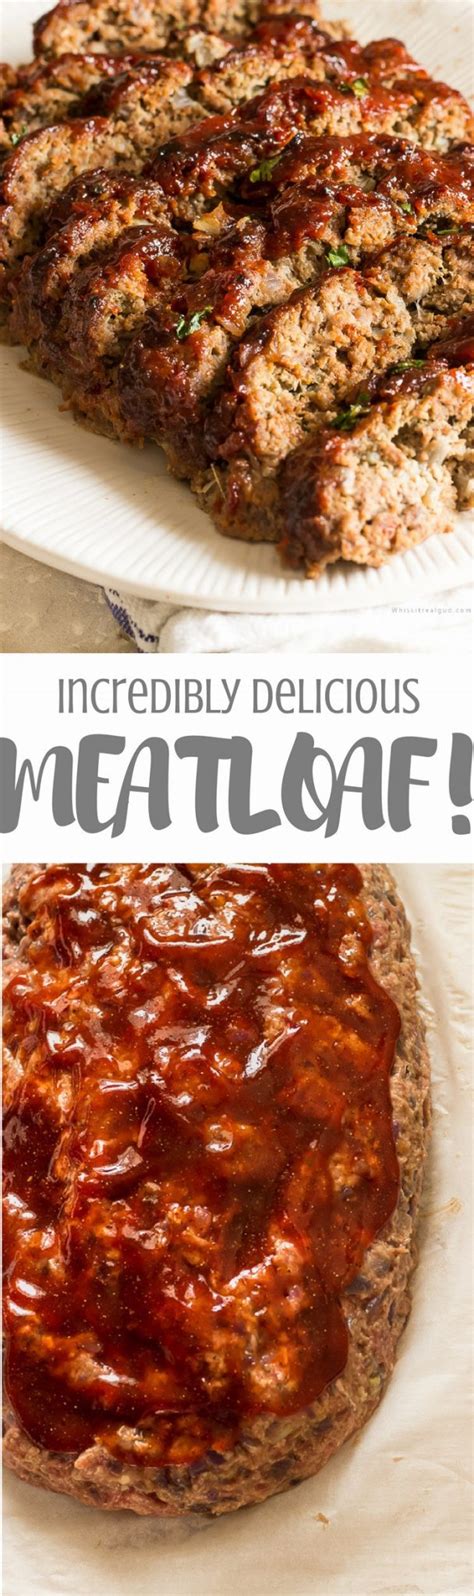 Great with mashed potatoes and green beans or corn. 2 Lb Meatloaf Recipe / Meatloaf with Stuffing is a tasty 2 pound ground beef ... : 2 pounds of ...